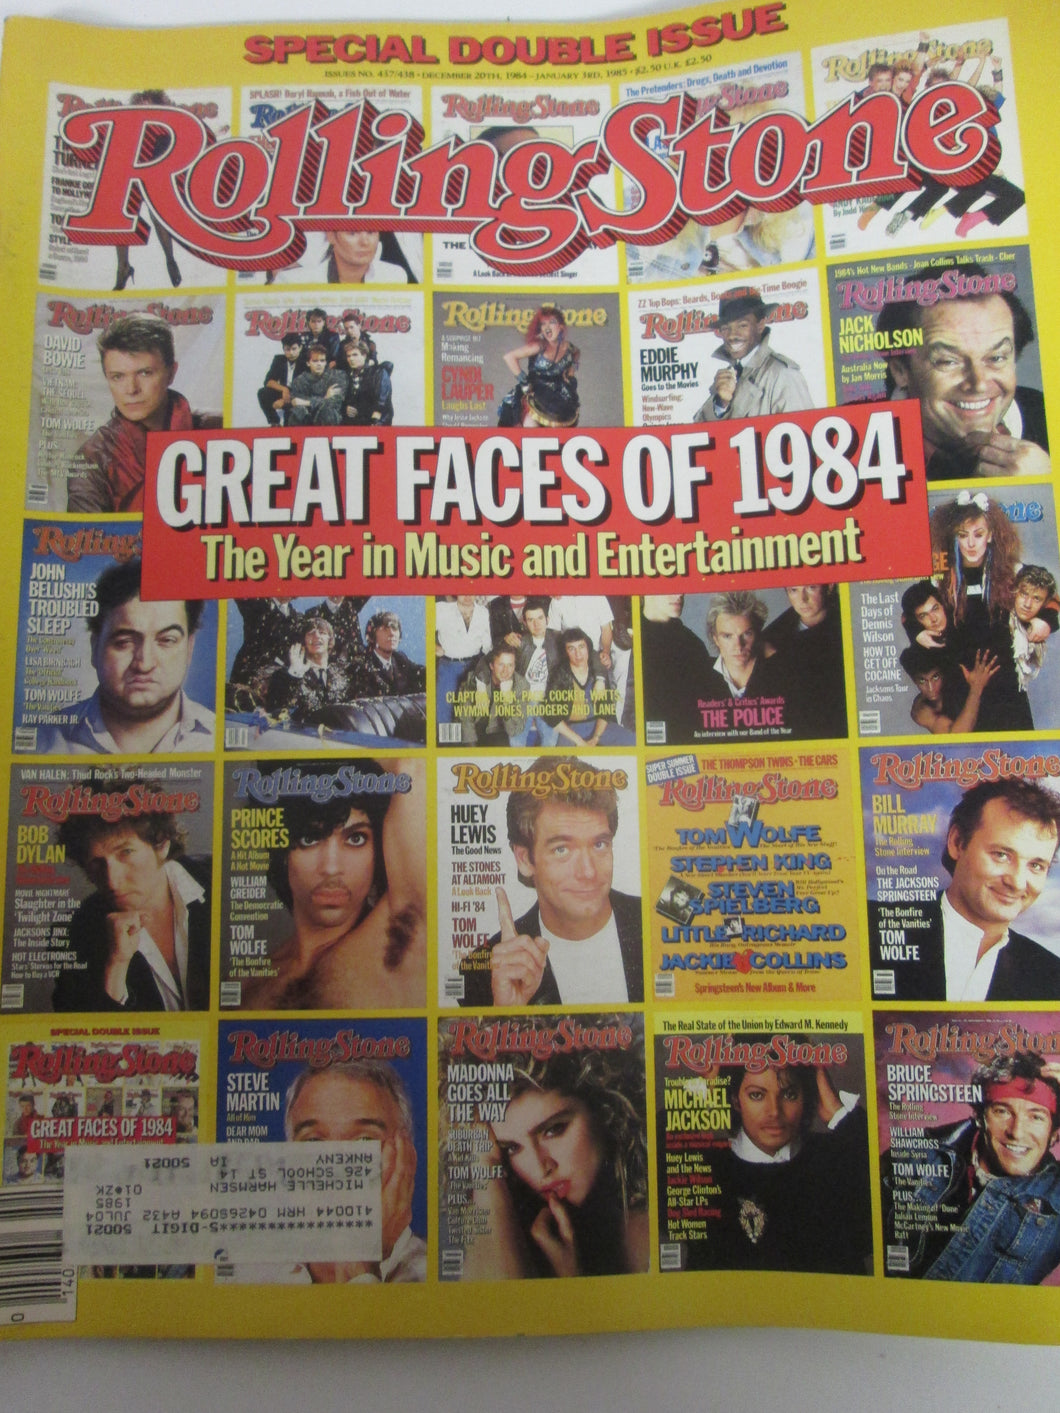 Rolling Stone Magazine December 20 1984 #437/438 Great Faces of 1984 Rolling Stone Issue Cover